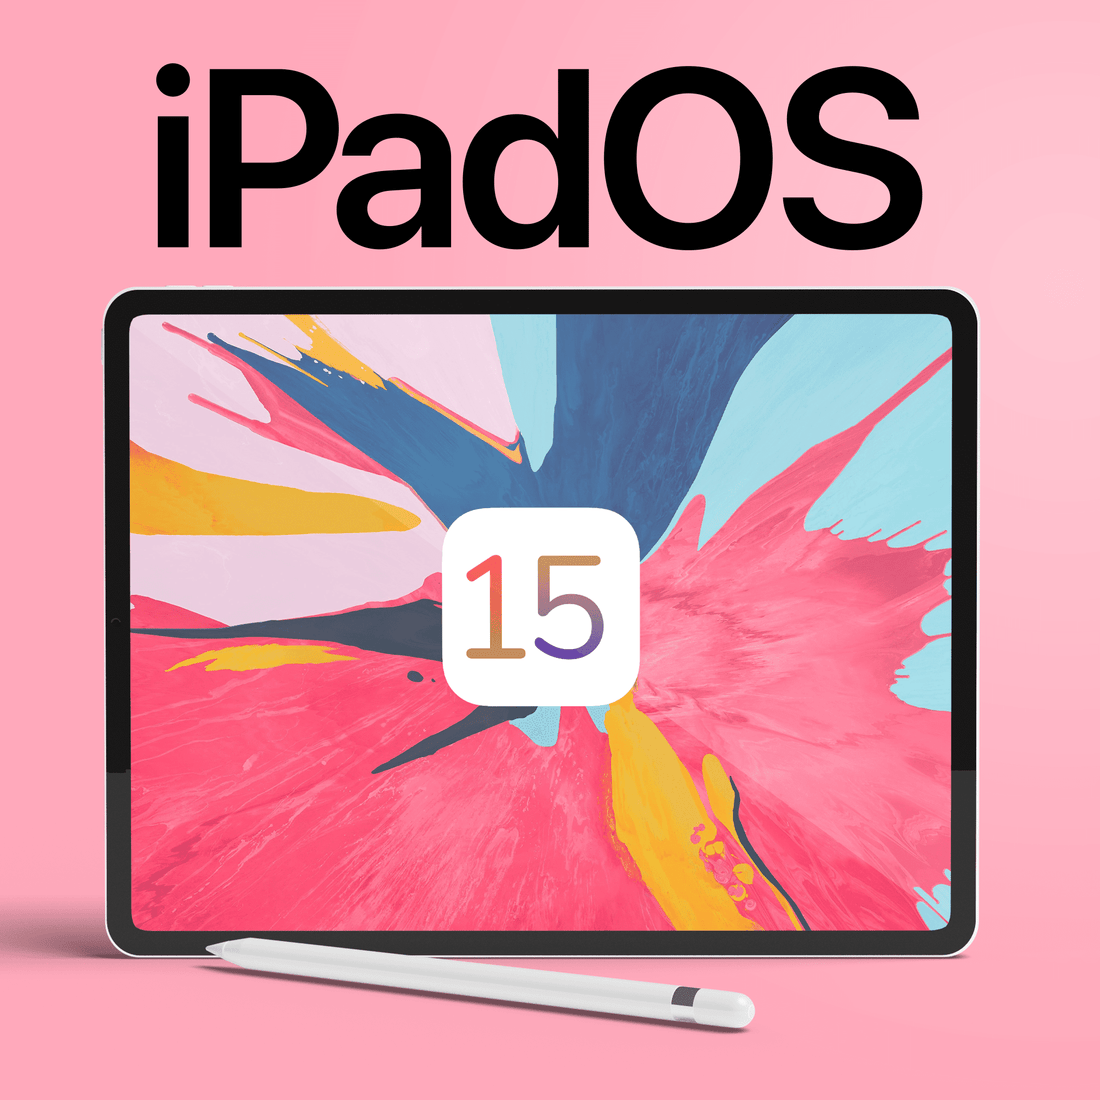 The New Release of Apple IPad OS 15